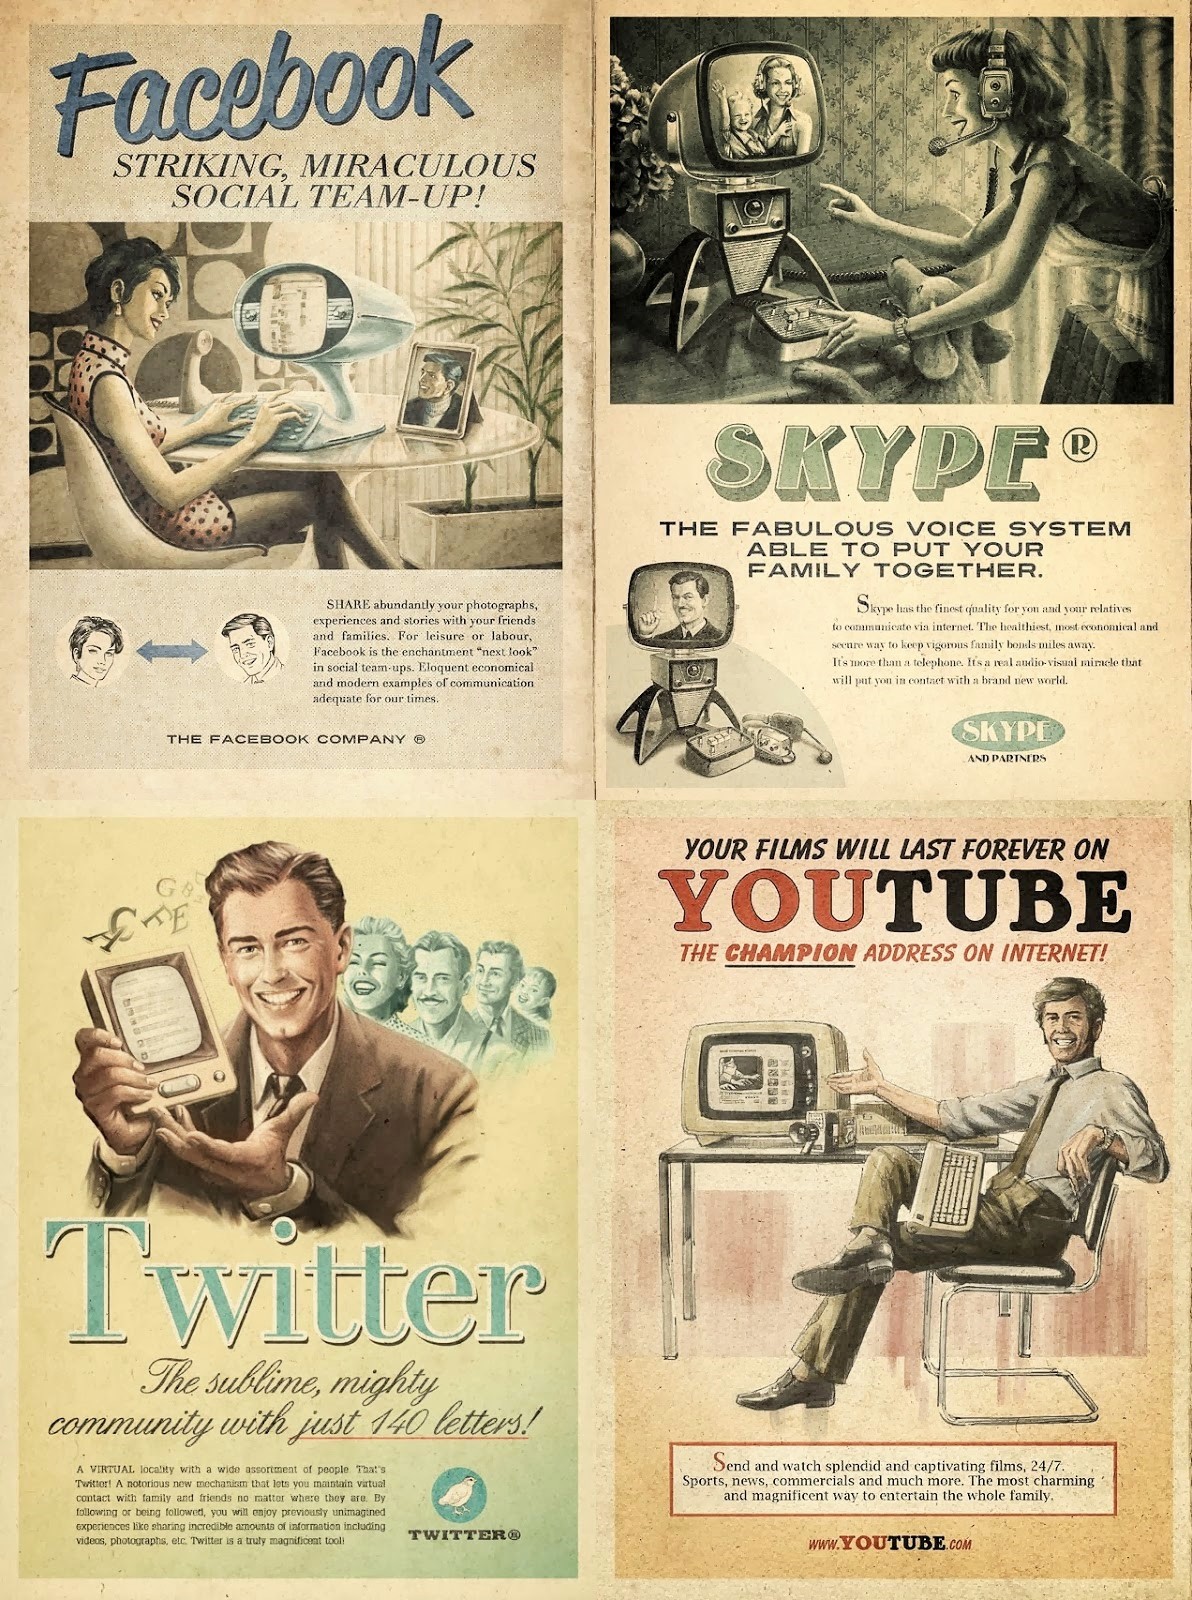 https://verbalistseducation.com/2016/04/22/excellent-social-media-vintage-ads-for-everything-ages-fast/ (Accessed April 4, 2023).